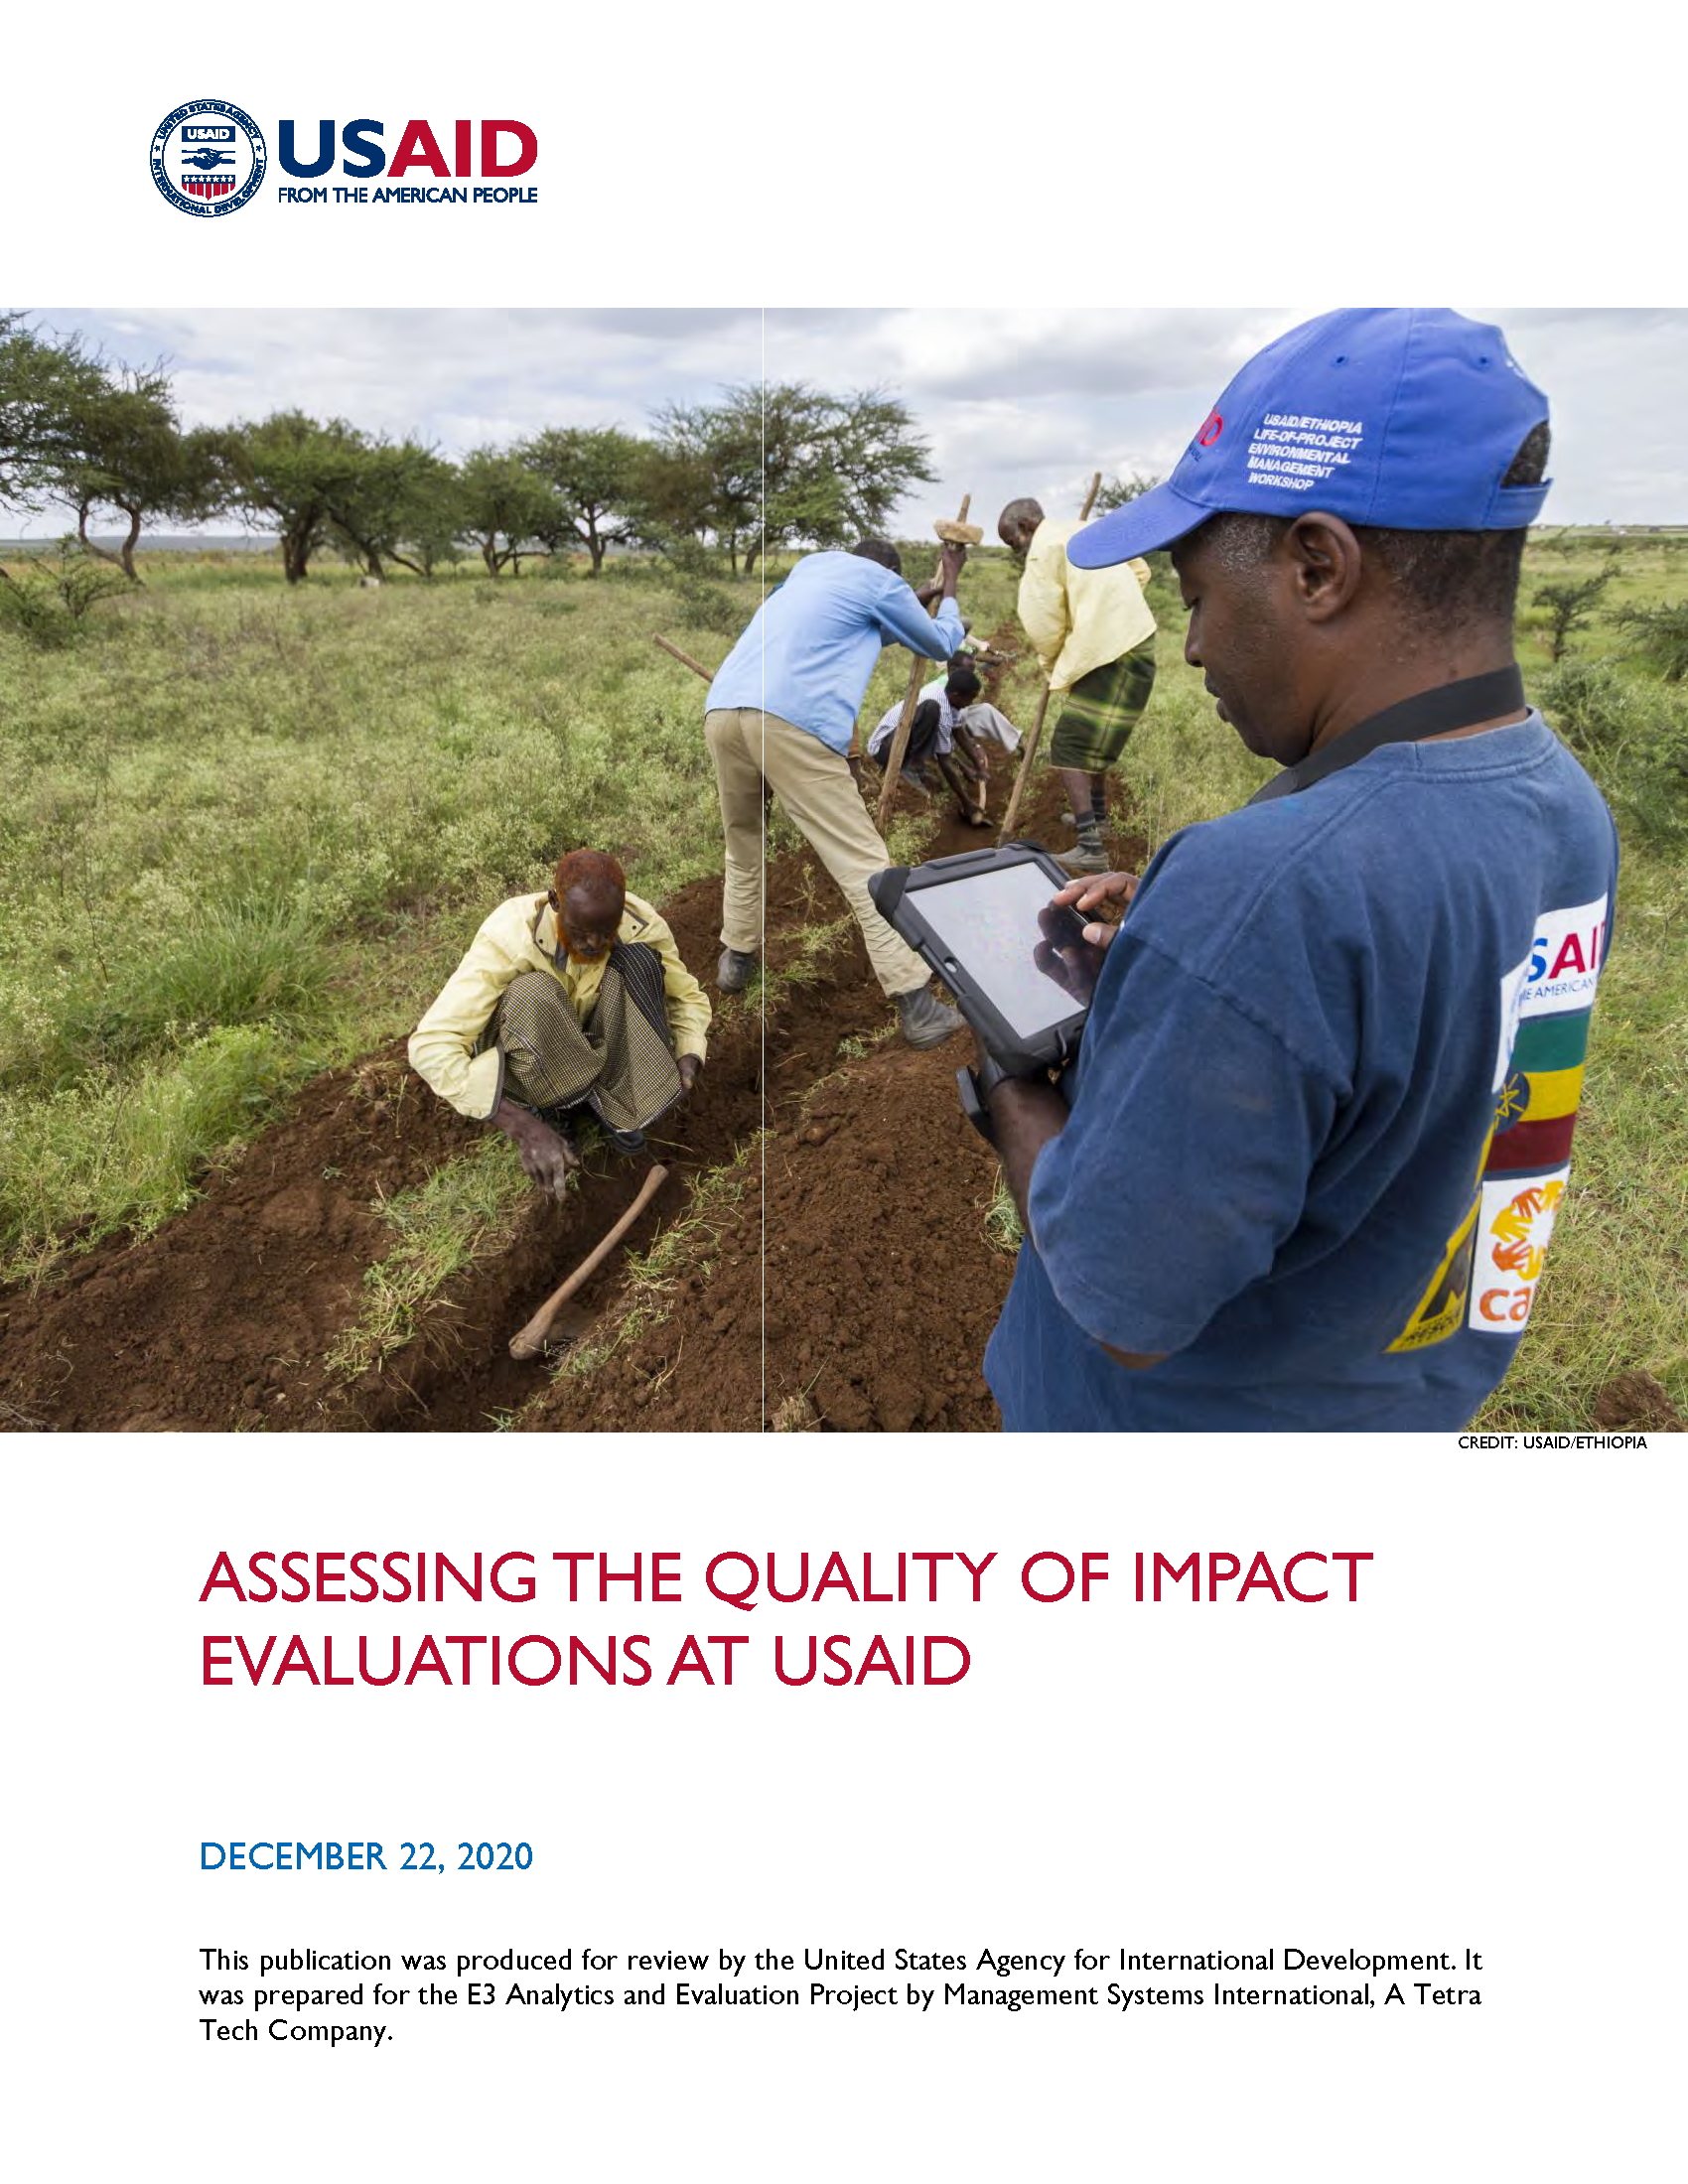 Cover page for Assessing the Quality of Impact Evaluations at USAID